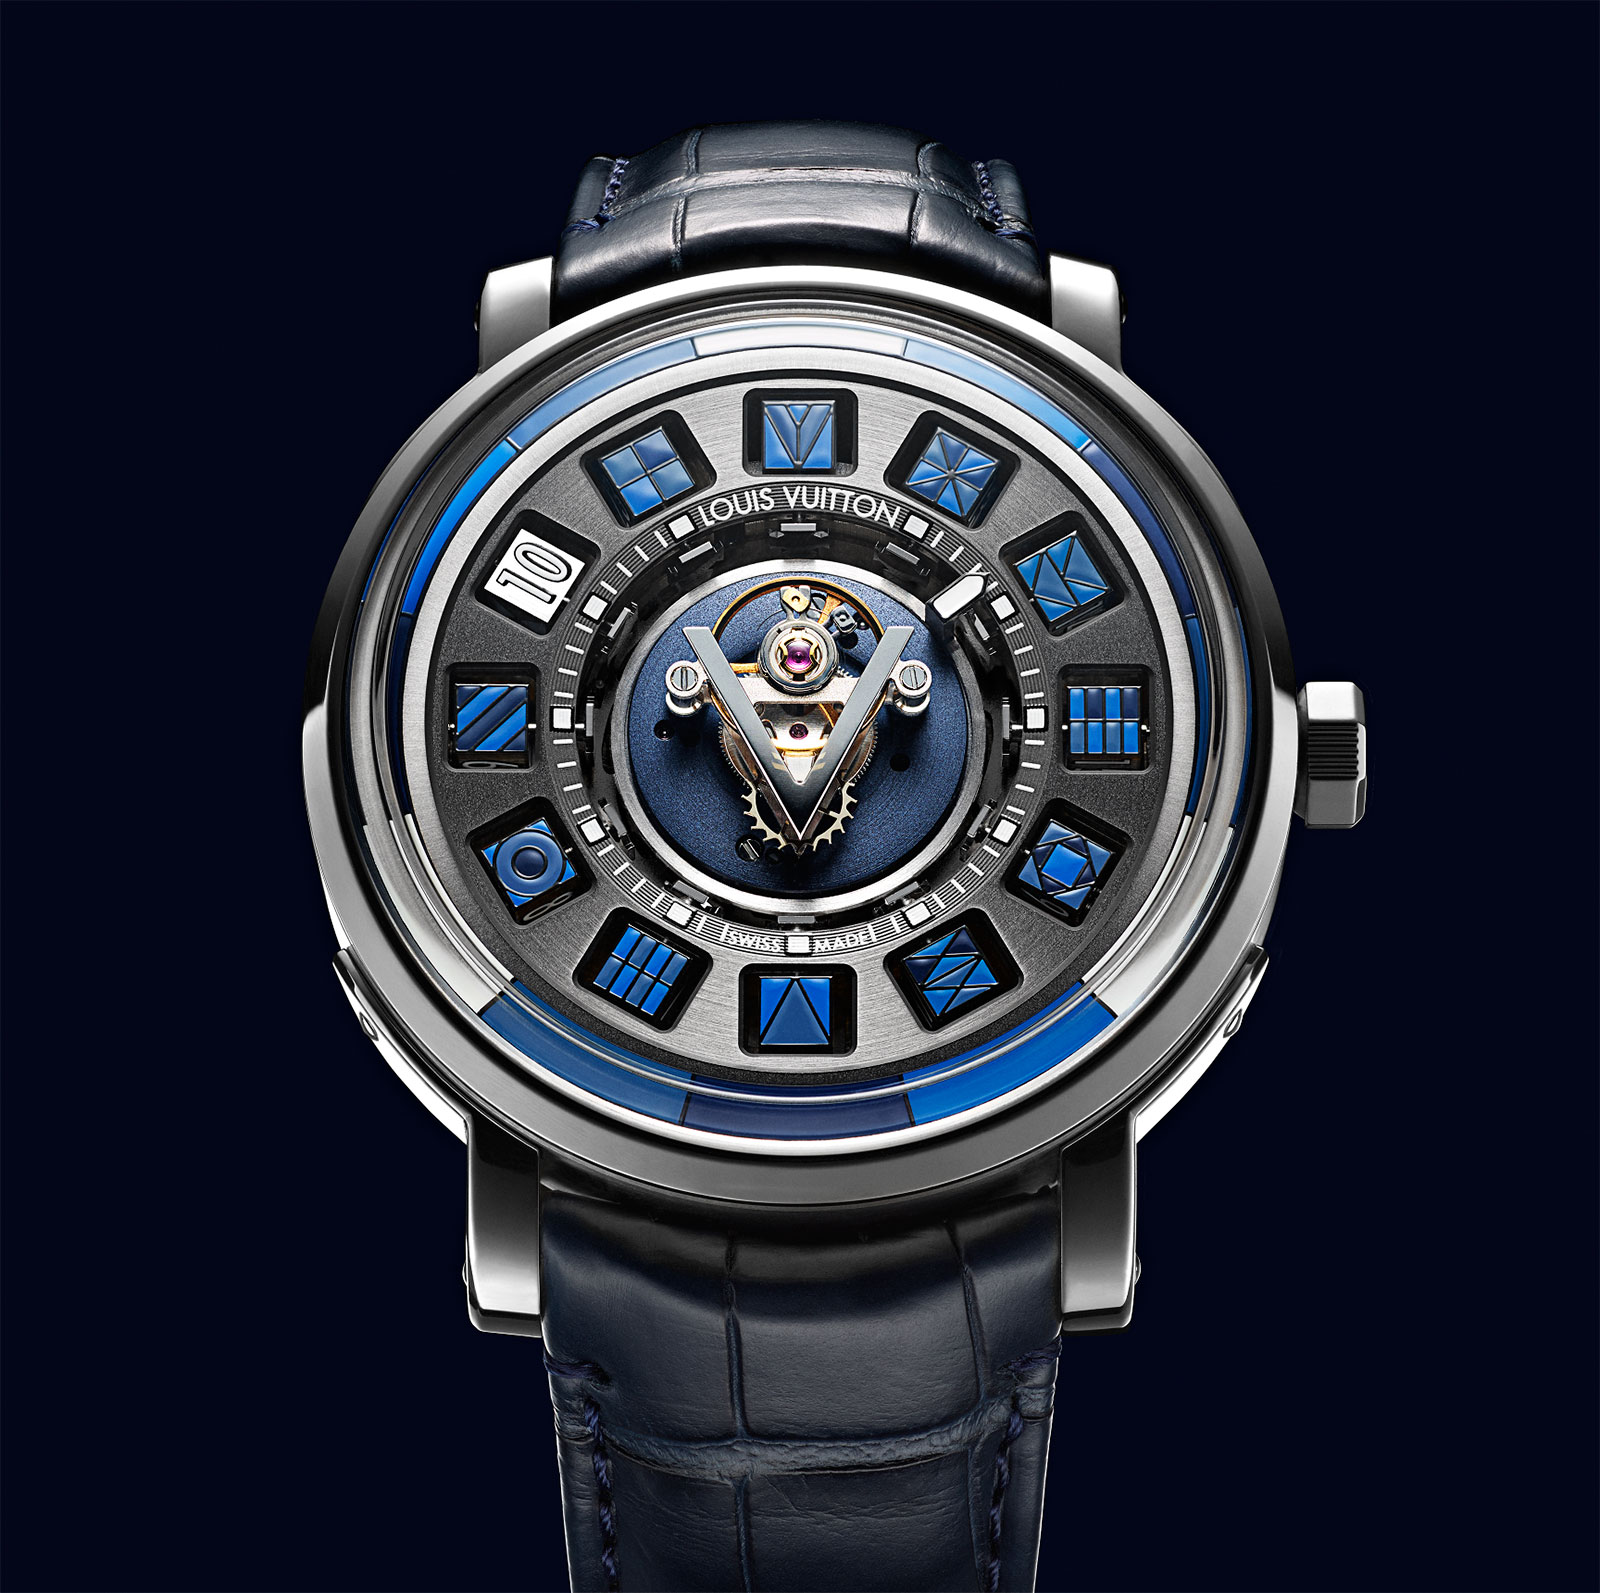 Introducing the Louis Vuitton Escale Blue Spin Time Central